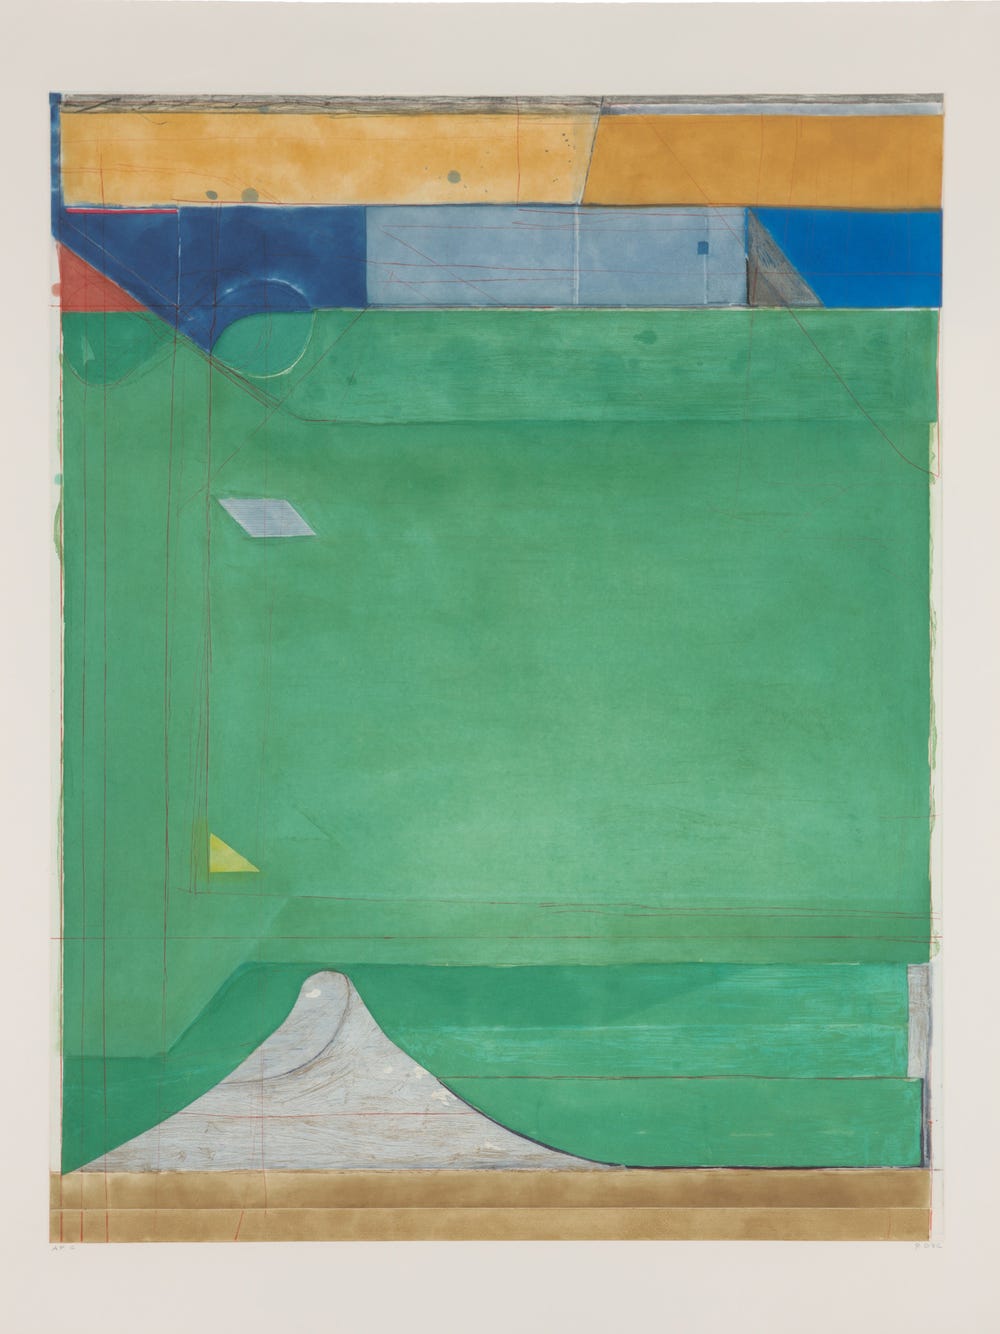 Diebenkorn print published by the Crown Point Press of the Fine Arts Museums of San Francisco